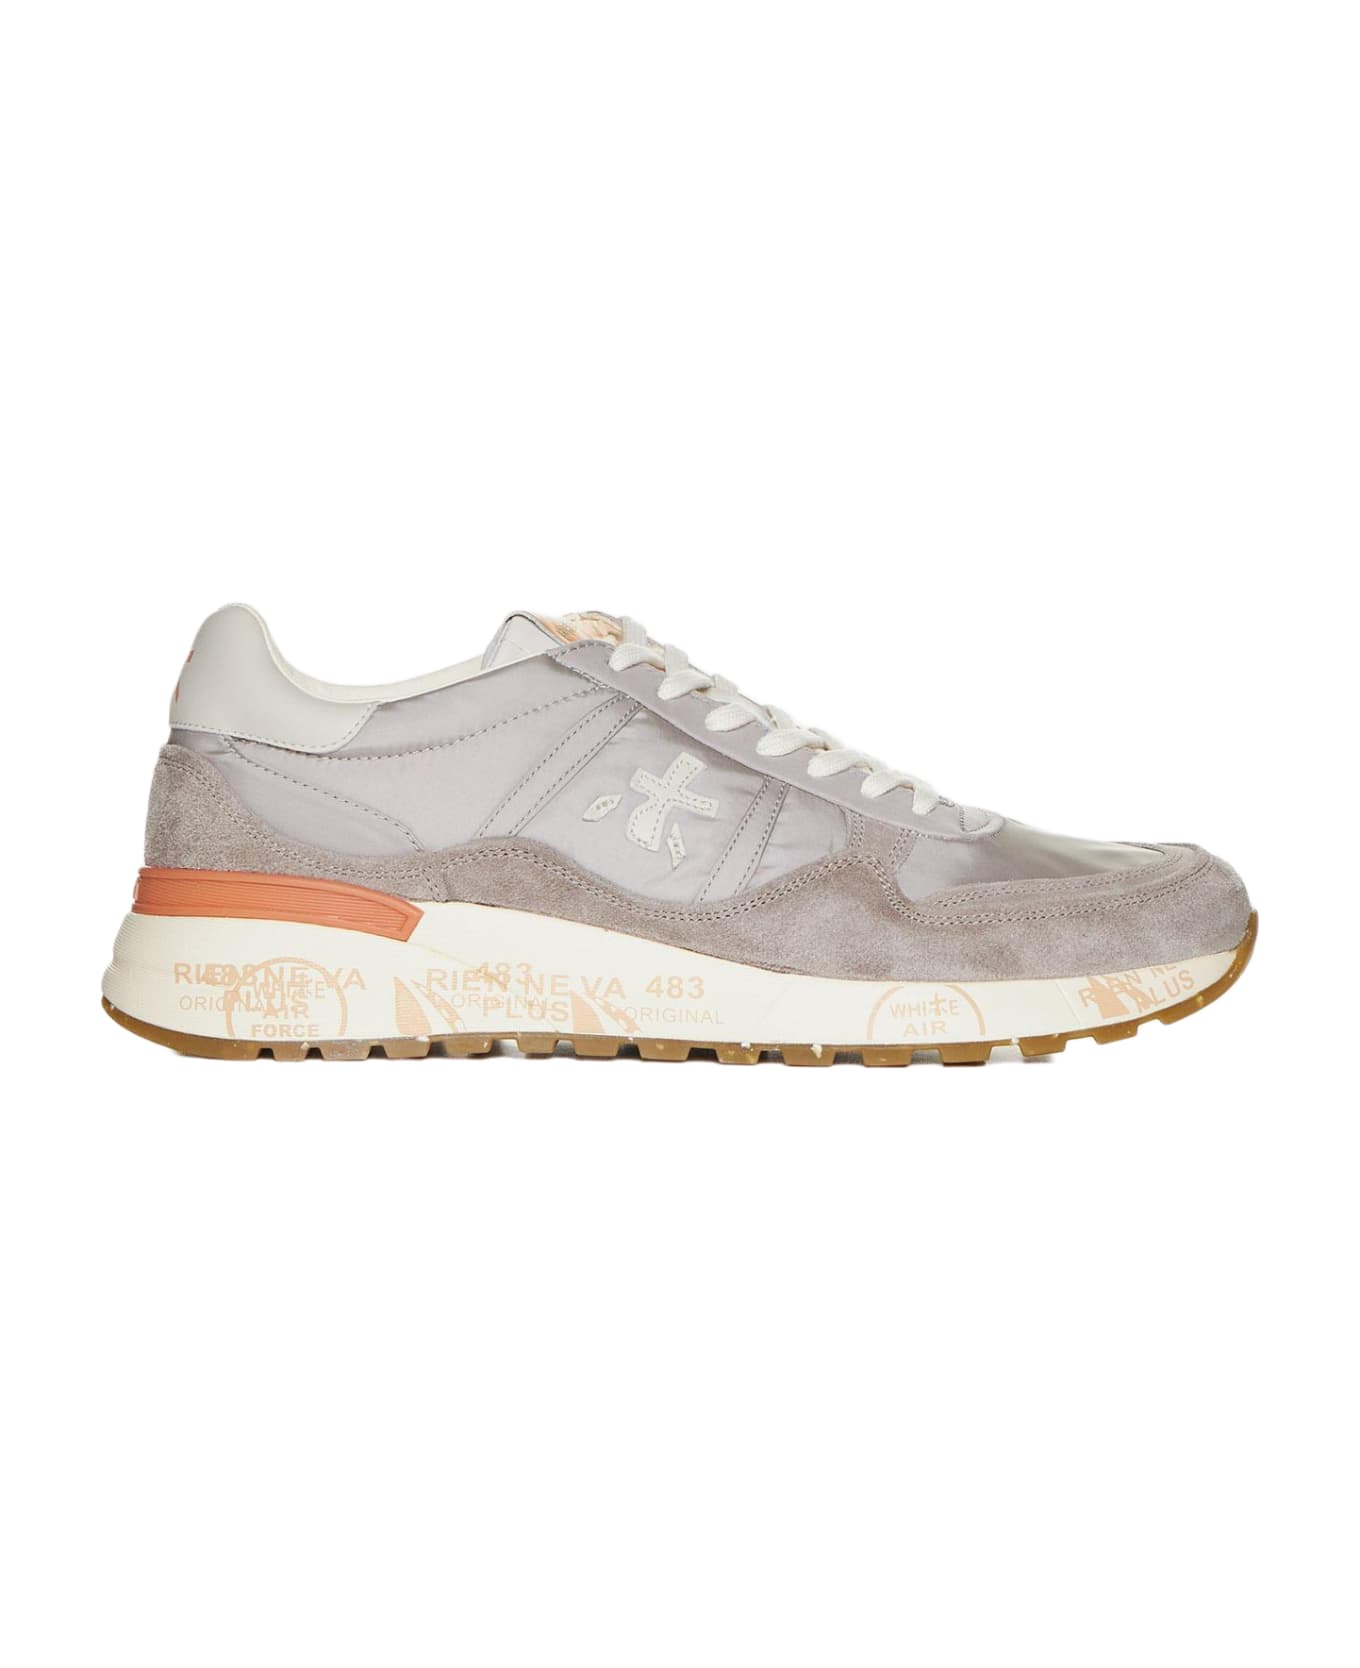 Premiata Landeck Leather, Nylon And Suede Sneakers